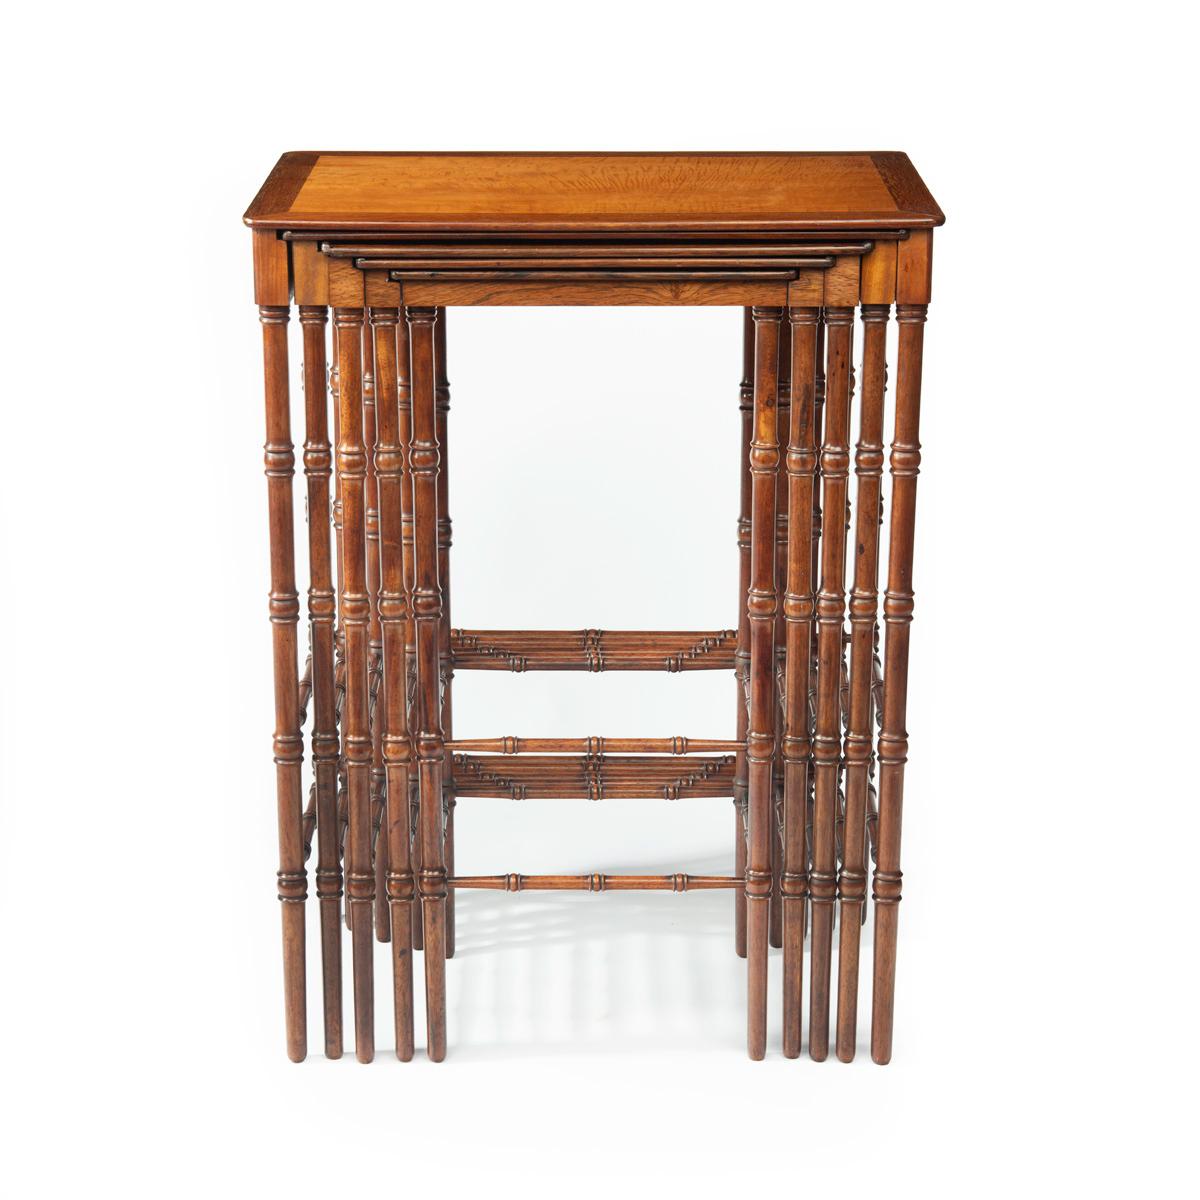 A nest of five Regency specimen wood tables attributed to Gillows, each of rectangular form with solid rosewood frame and finely turned legs joined by paired spindles, each top comprising a solid panel of an exotic wood, the largest table satinwood